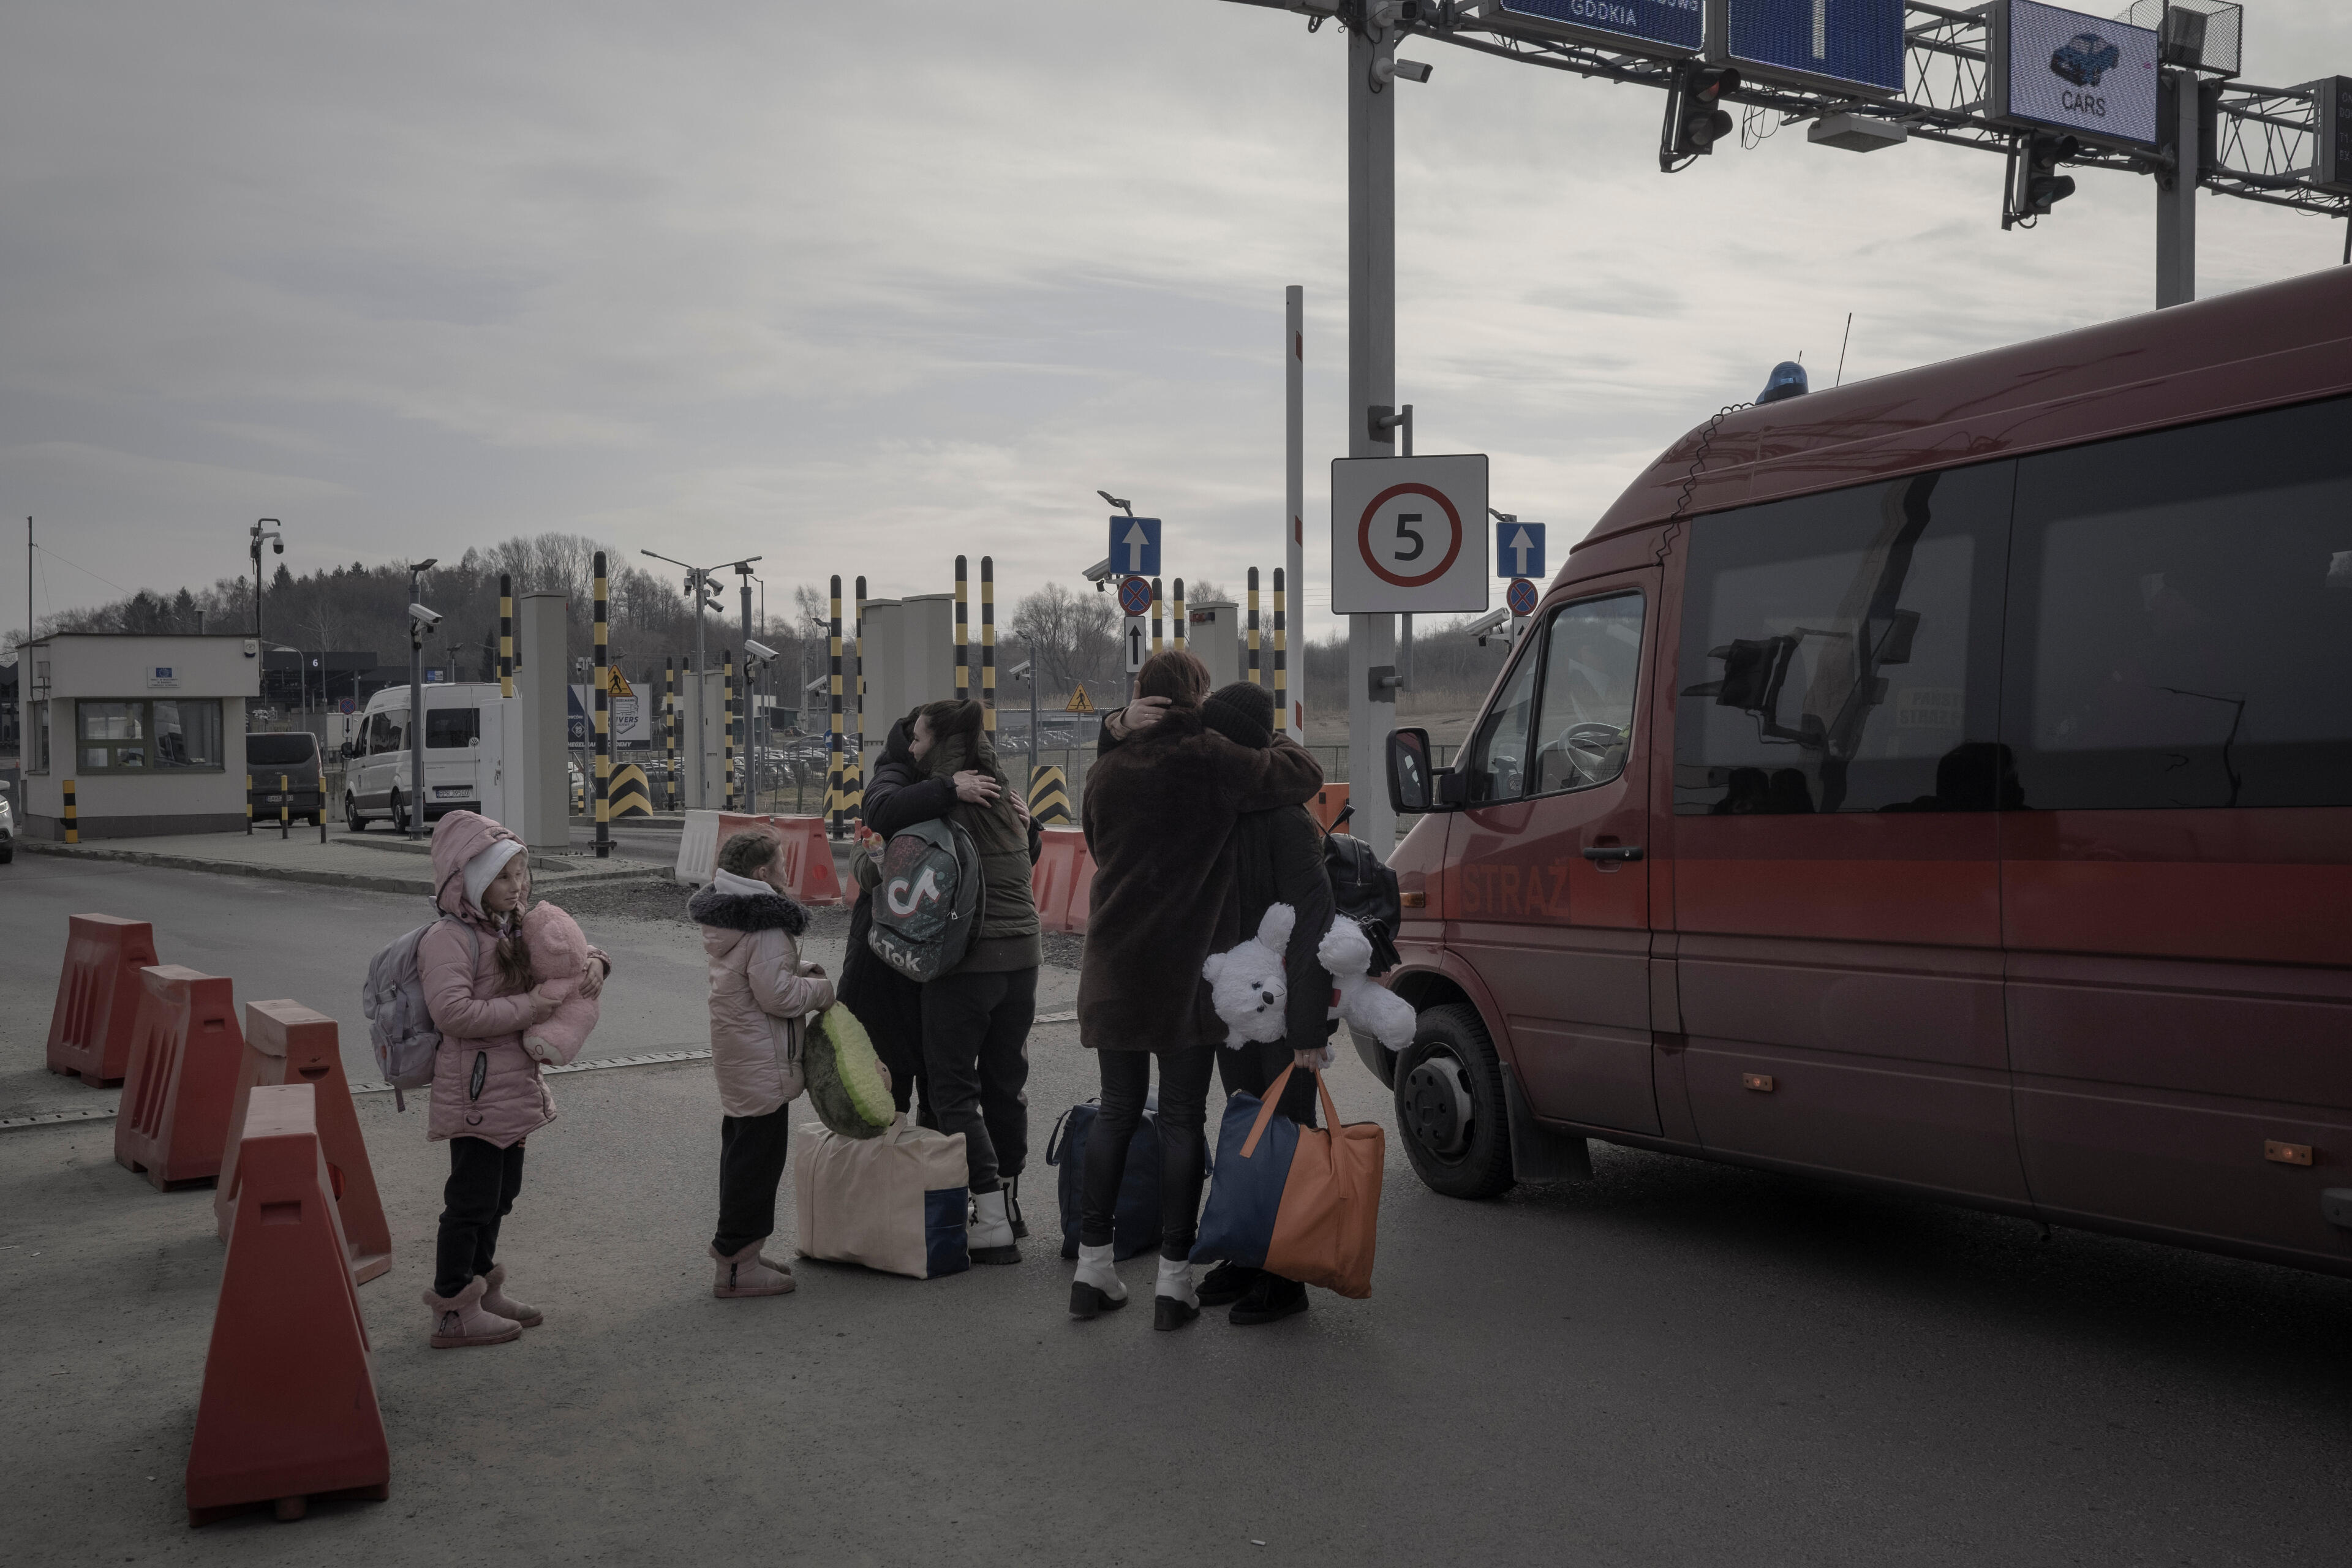 A Ukrainian family embraces at a Ukraine-Poland border crossing next to a van. One person holds a big teddy bear.